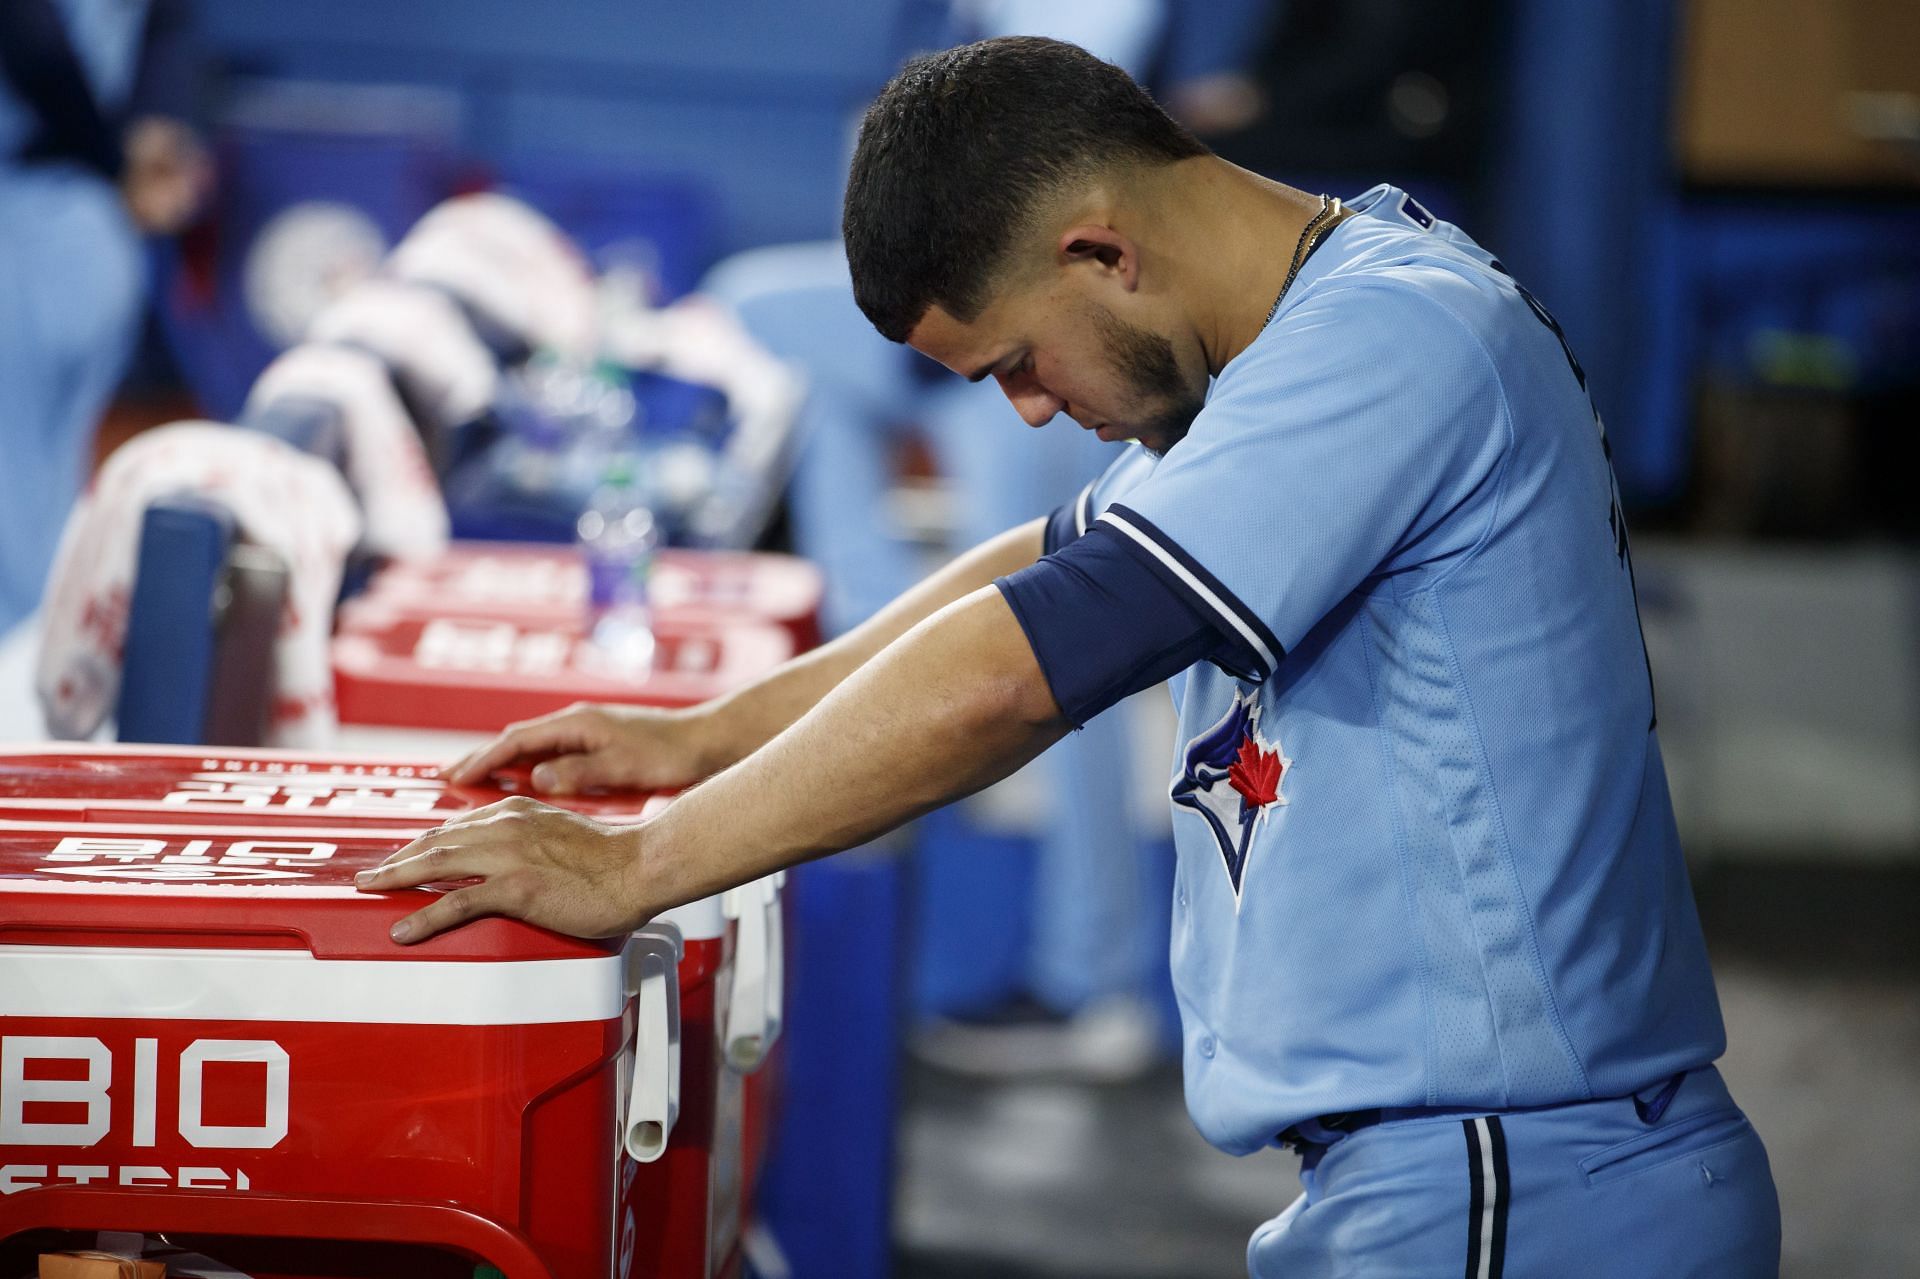 Toronto Blue Jays starting pitcher Jose Berrios gave up five runs in just three innings versus the Chicago White Sox tonight.